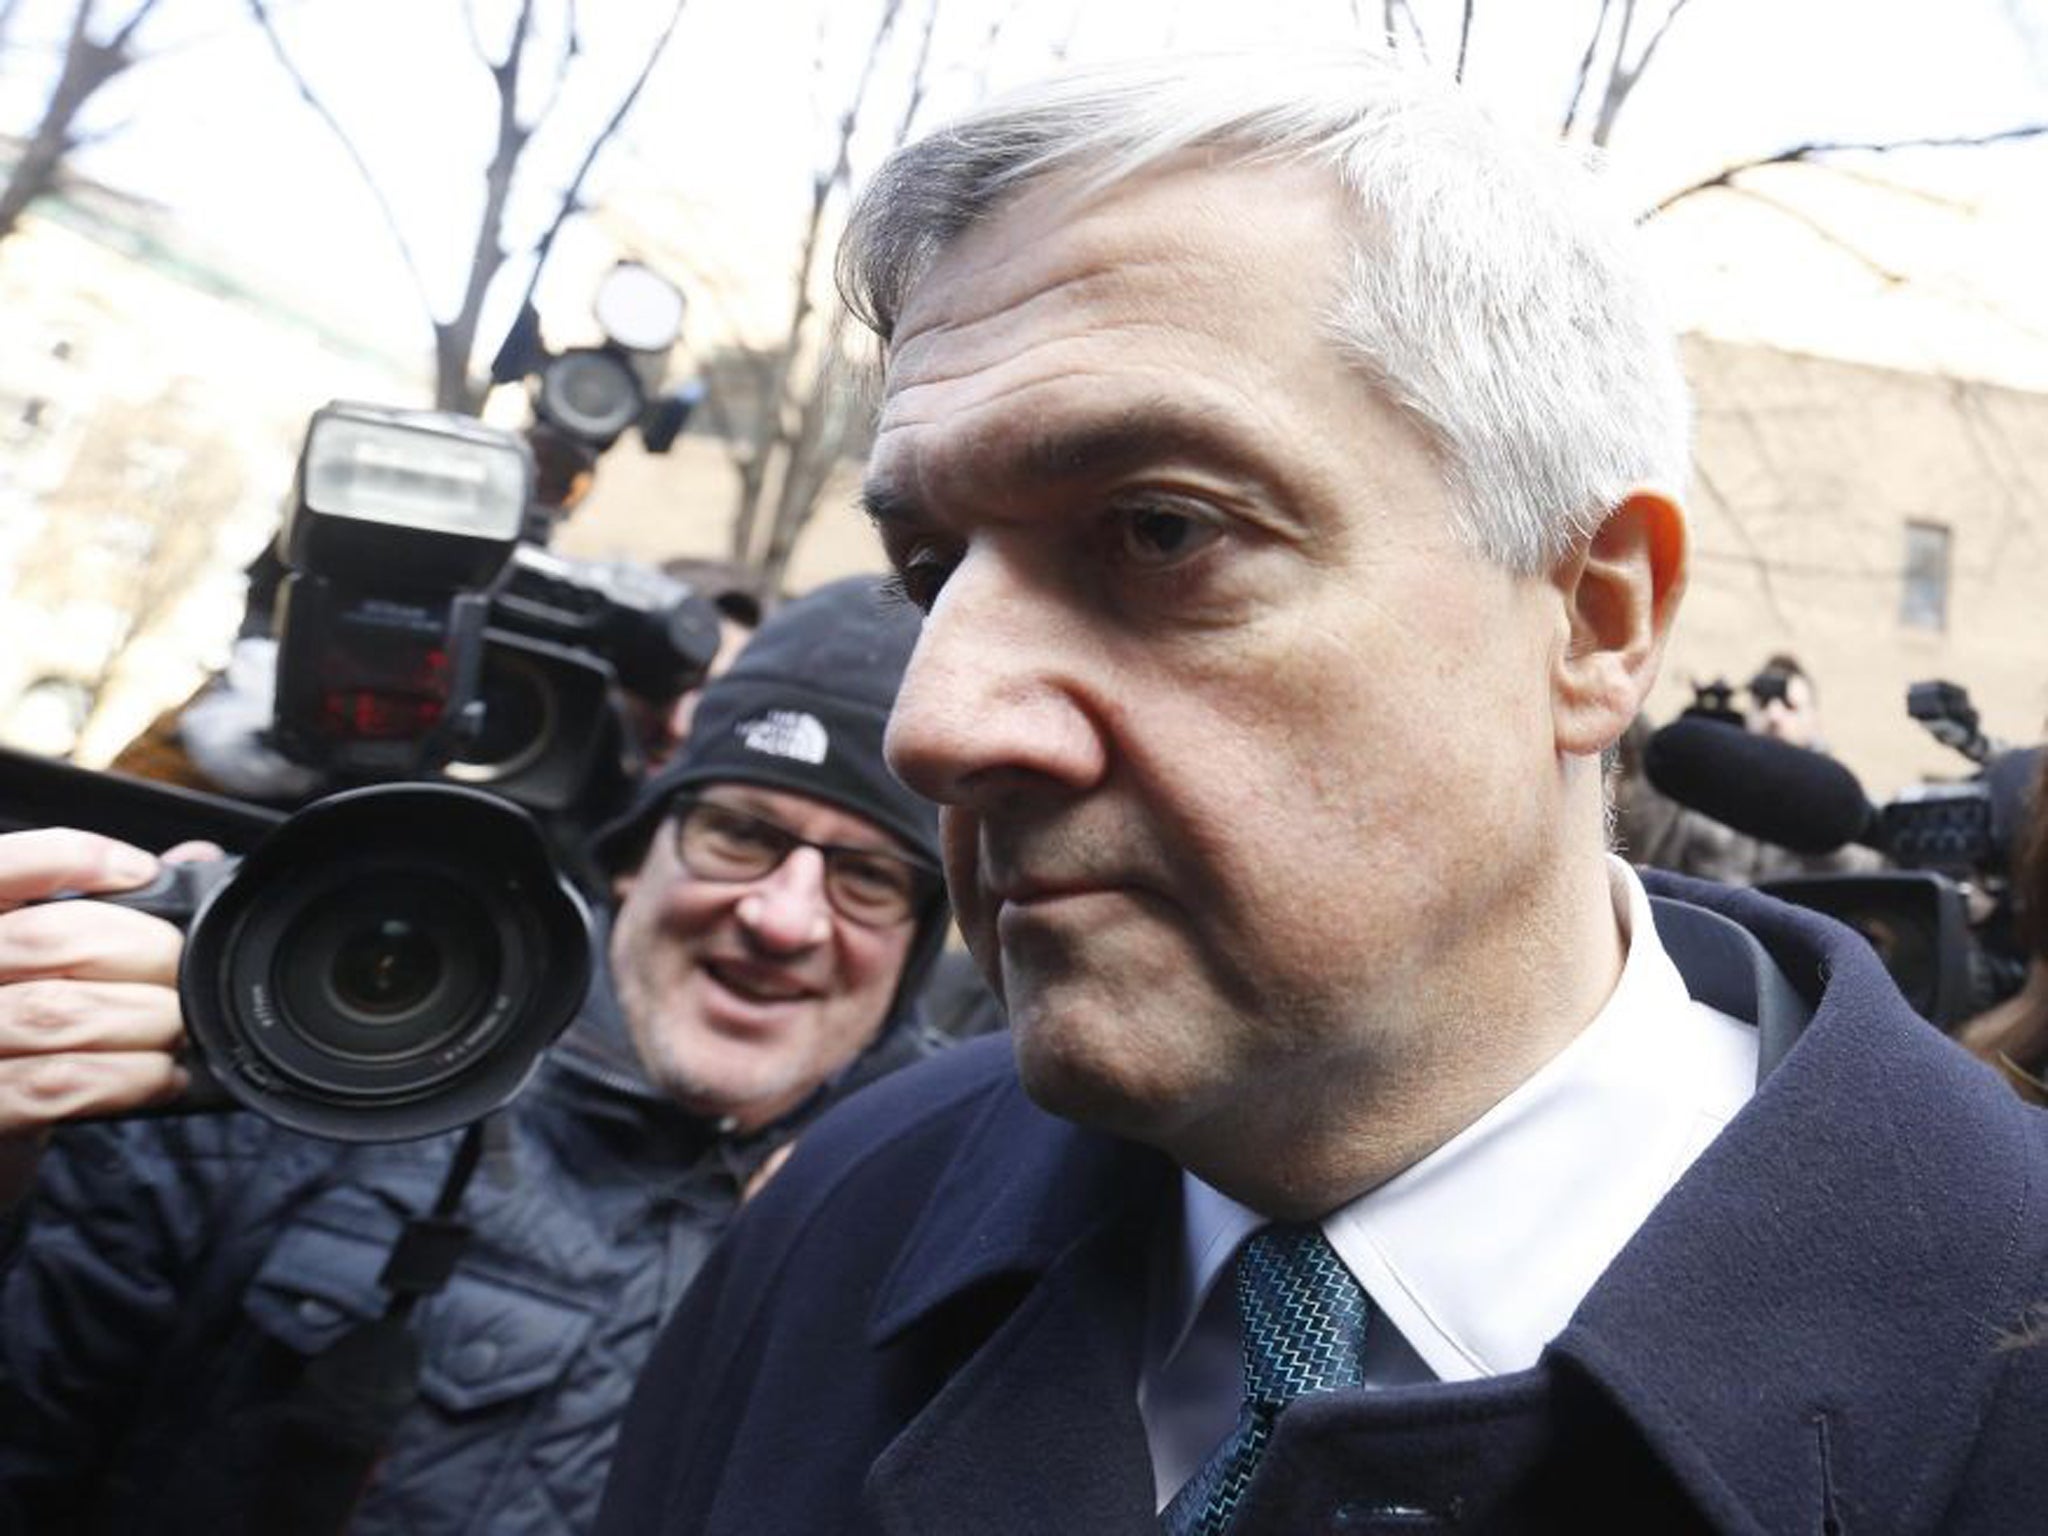 Former Liberal Democrat Cabinet minister Chris Huhne pleaded guilty and resigned as an MP